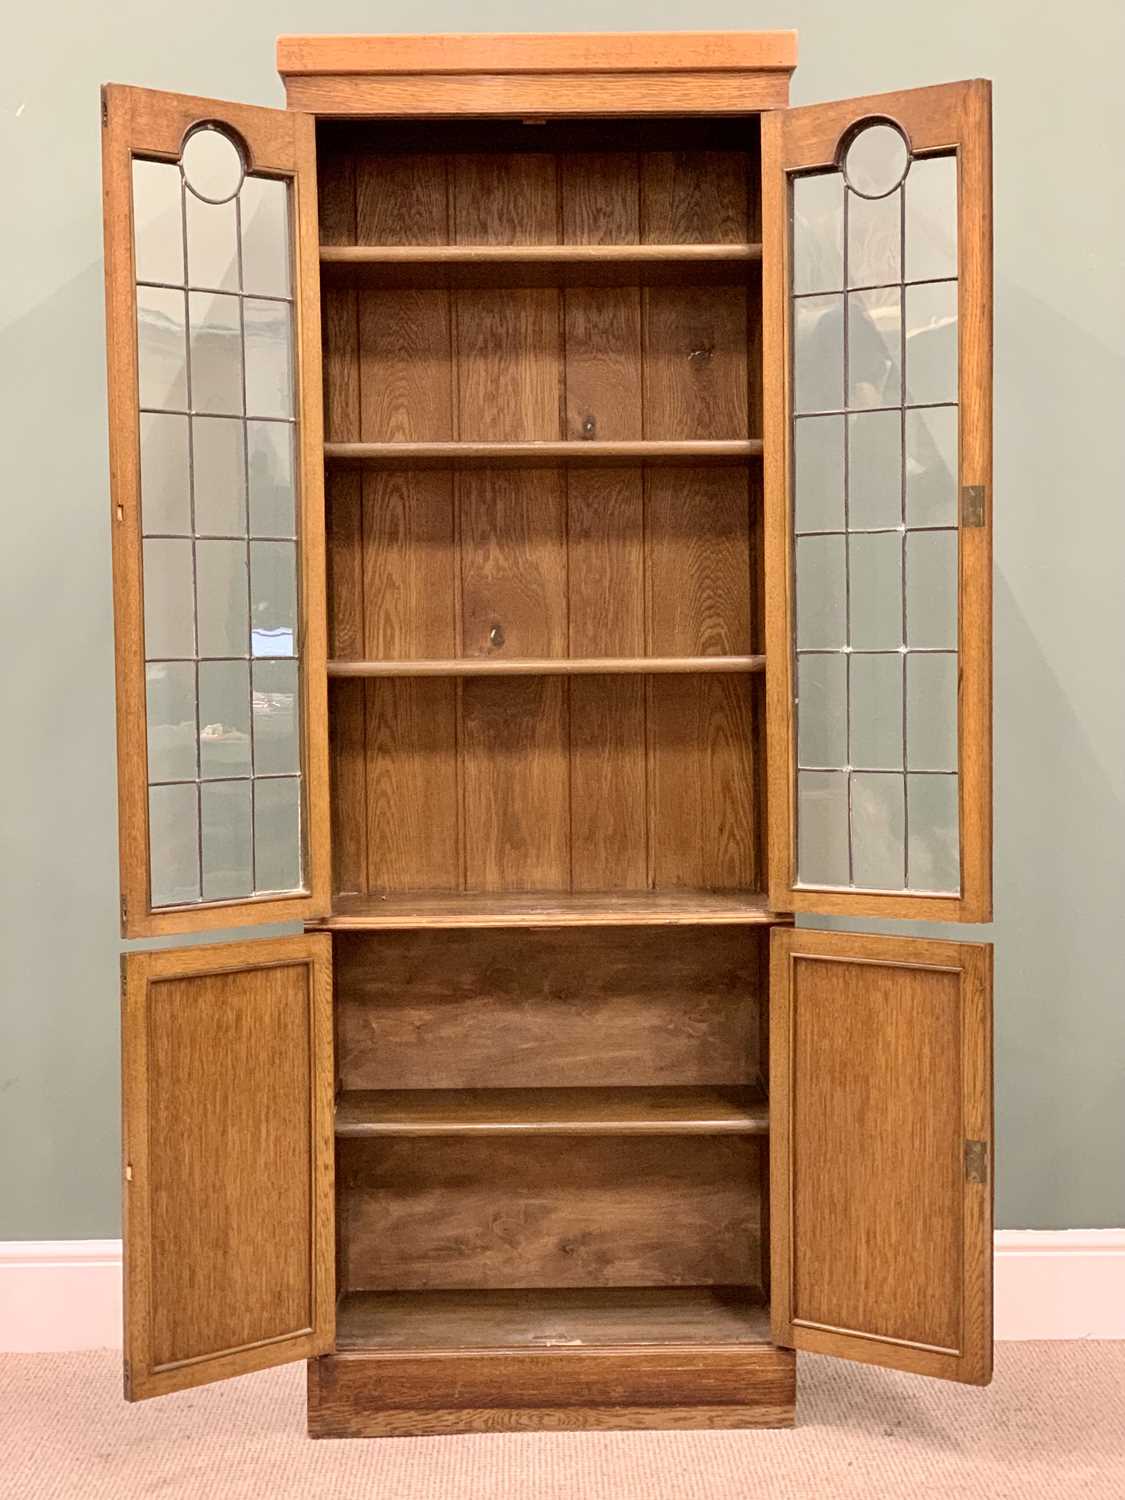 VINTAGE OAK GLAZED TOP BOOKCASE CUPBOARD - slim proportions with leaded glazed upper doors and - Image 2 of 4